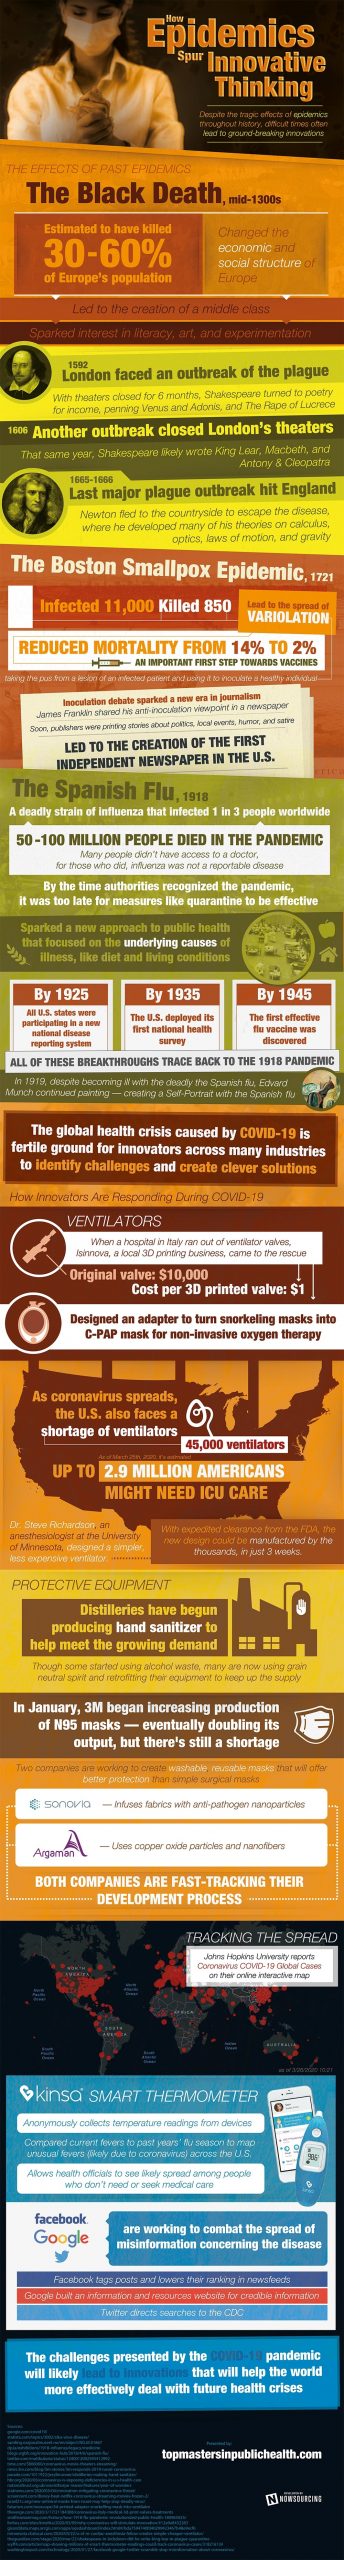 How Epidemics Spur Innovation [Infographic]